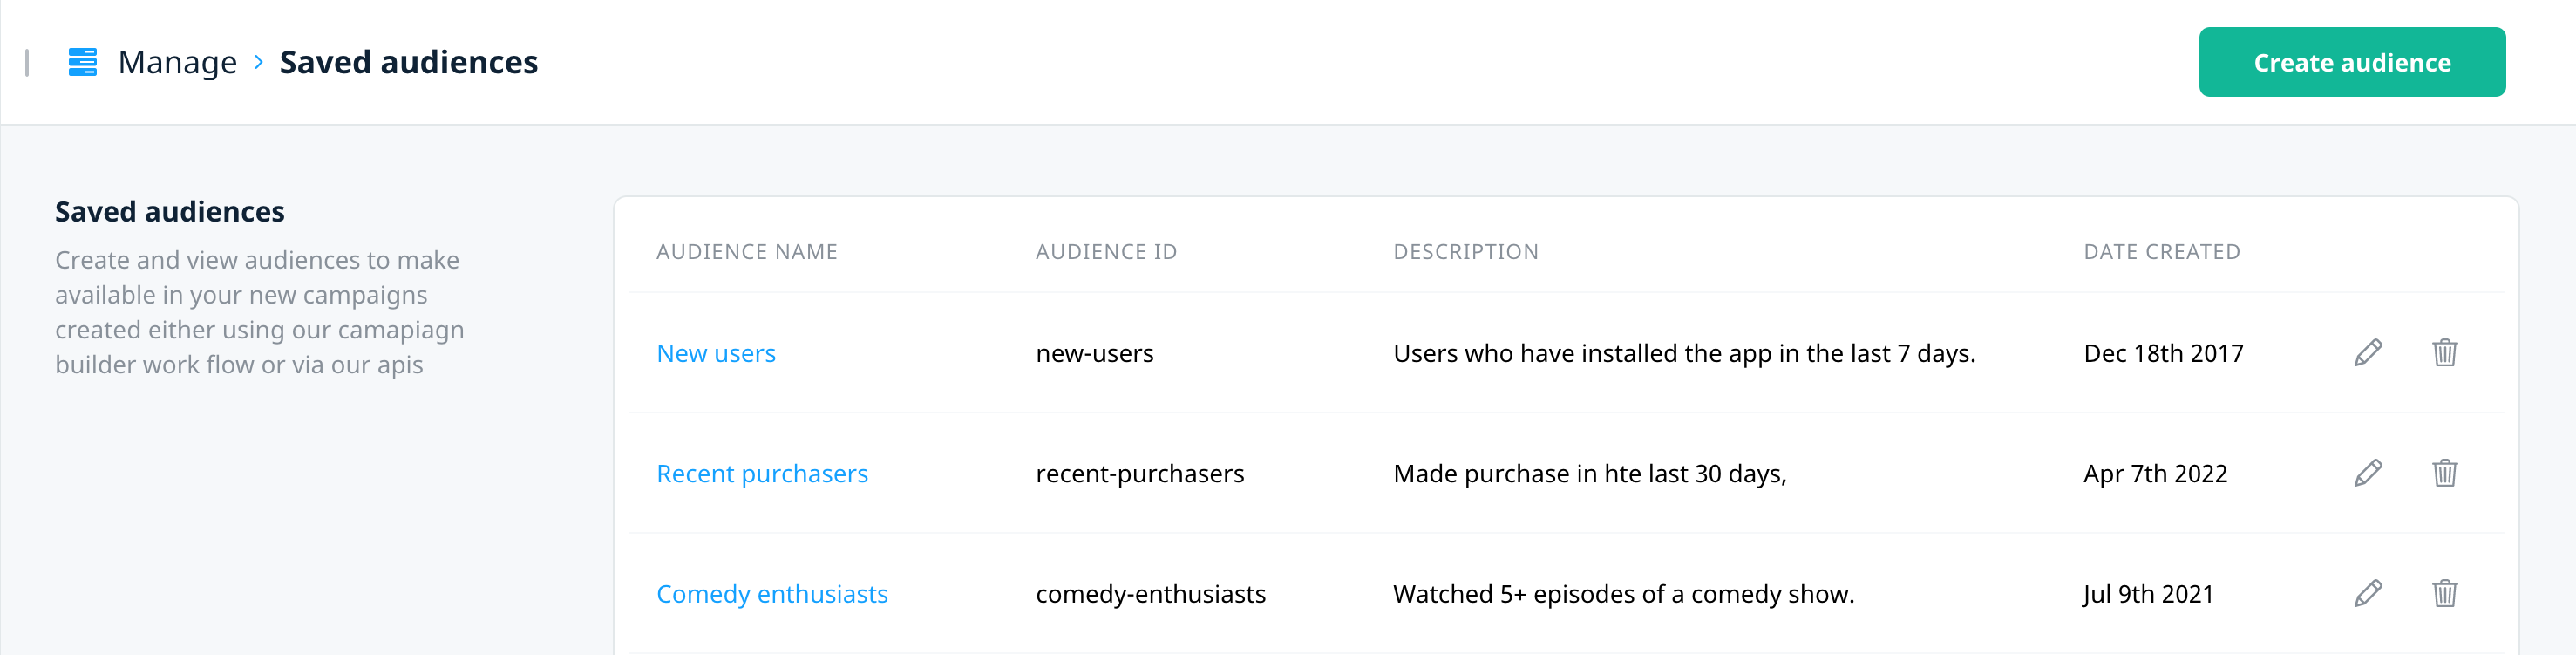 Saved audiences management screen